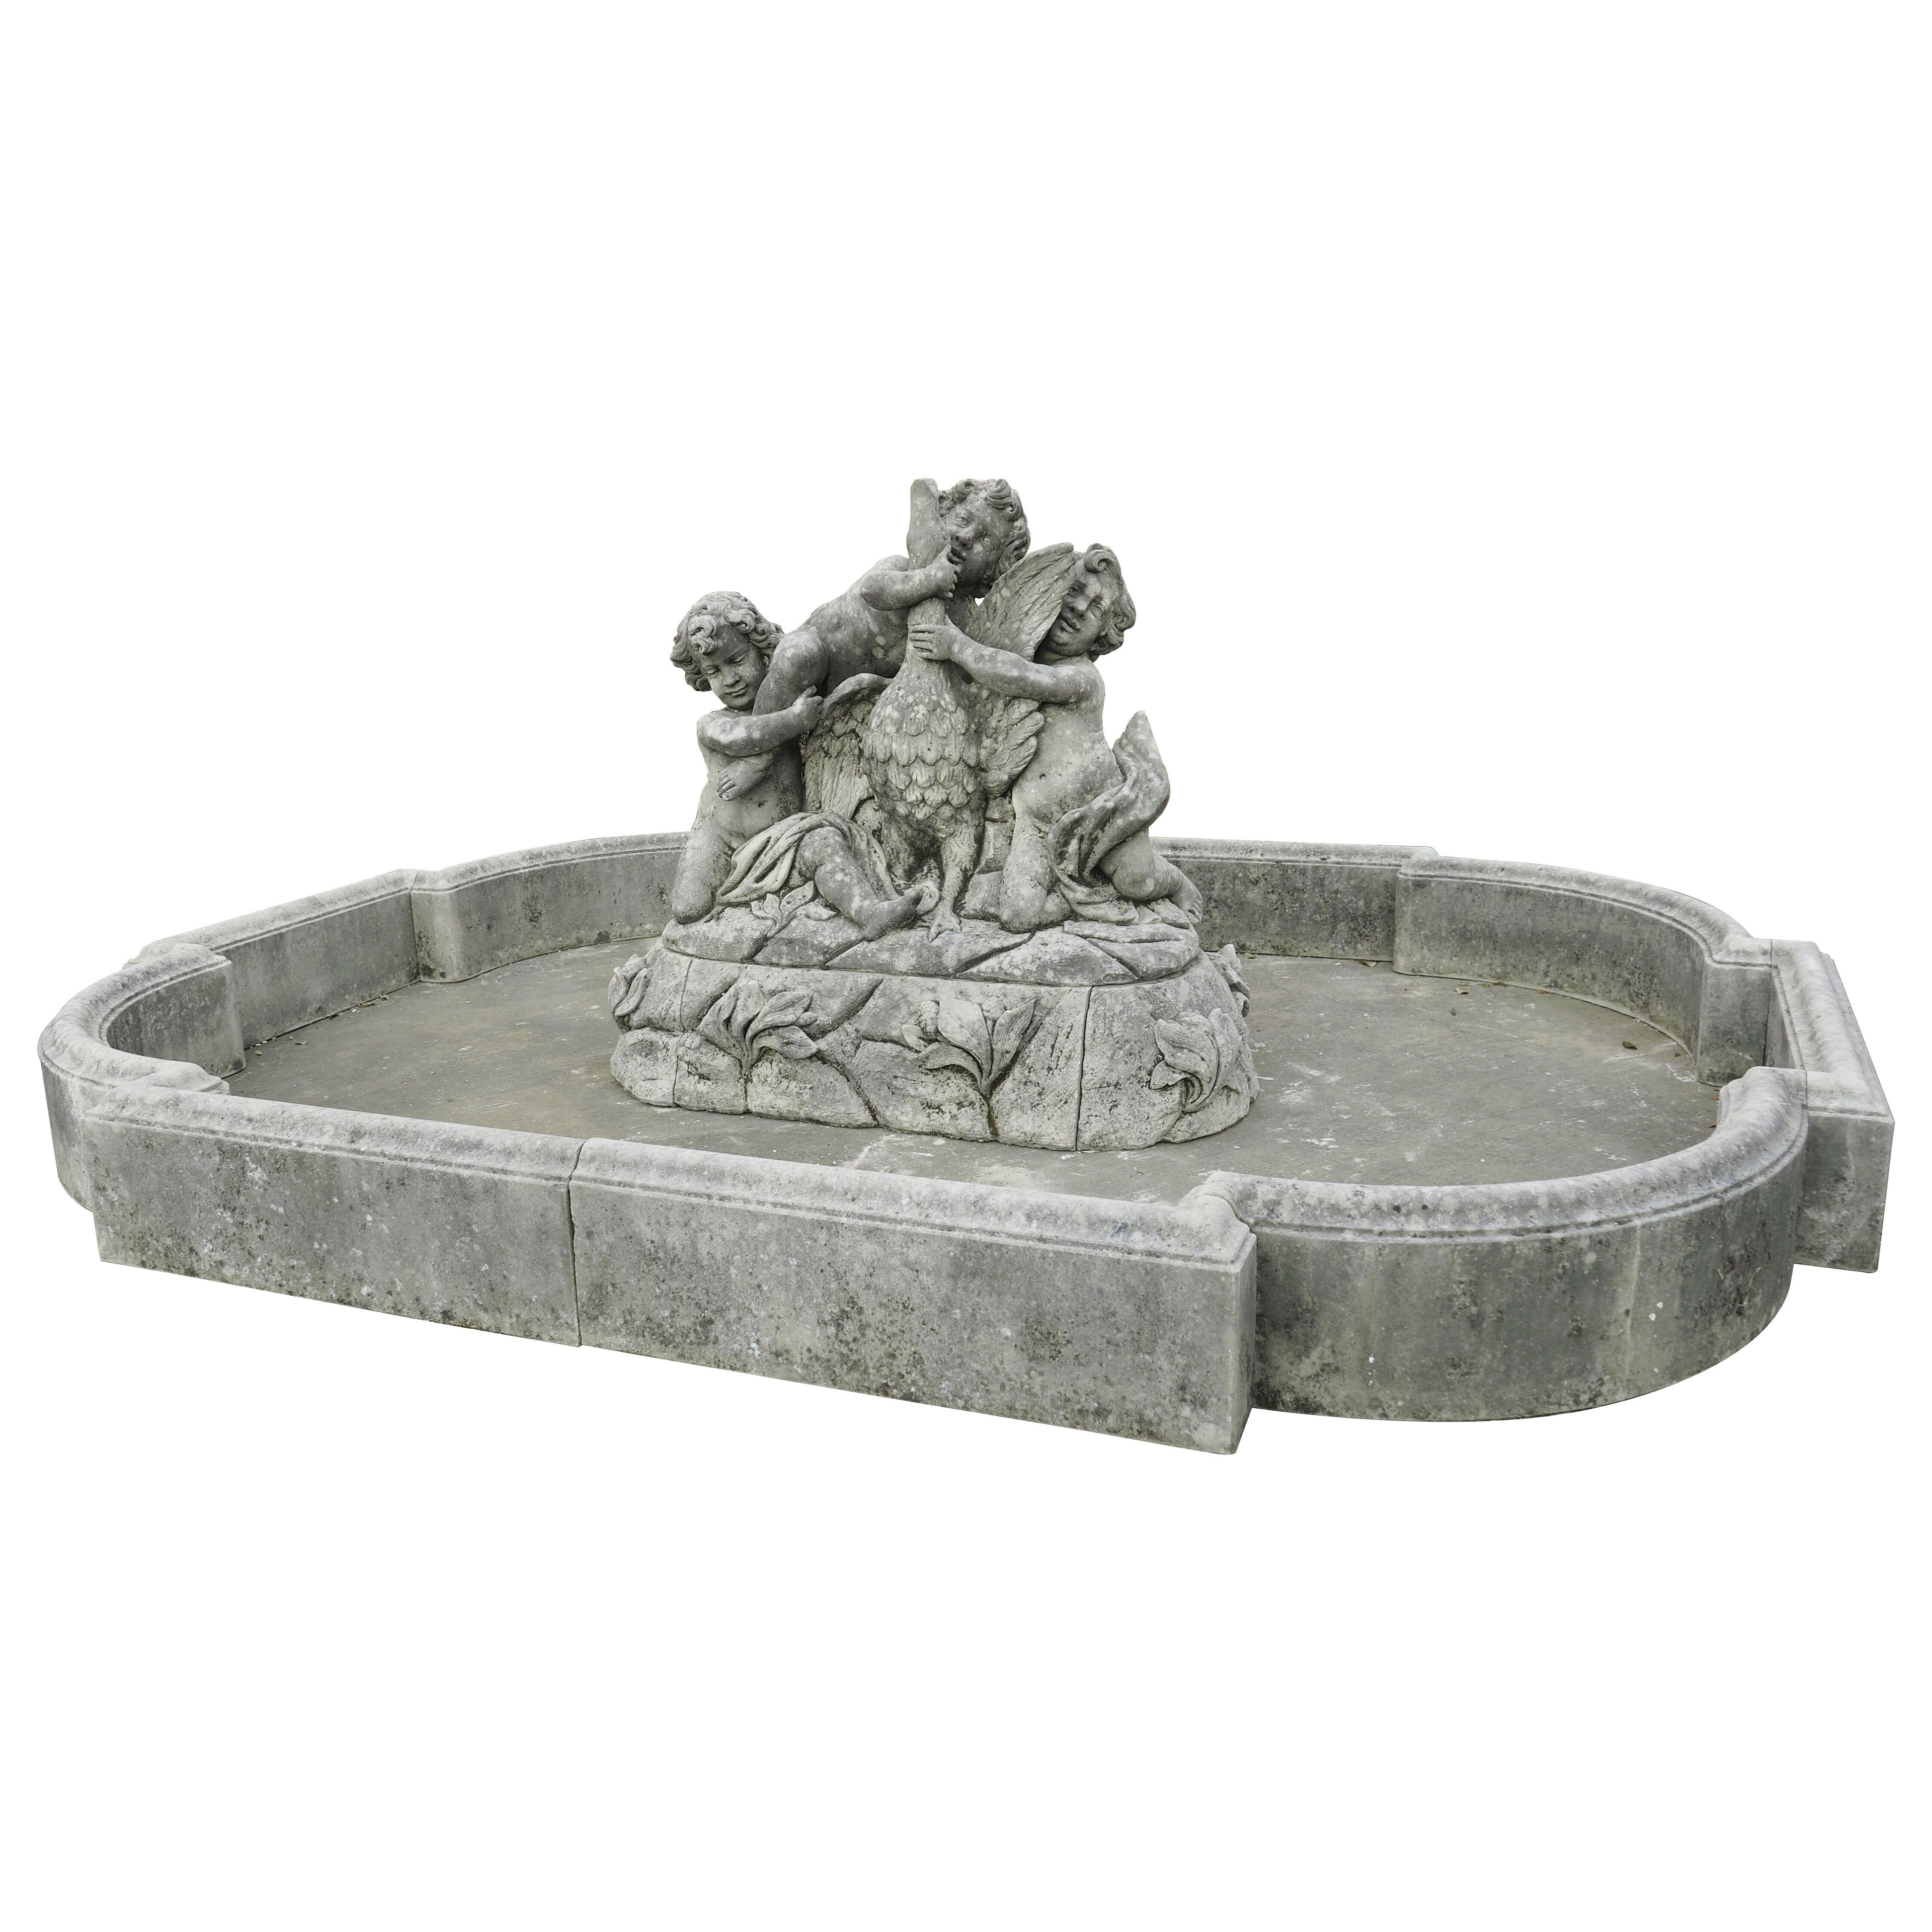 Grand Italian Limestone Center Fountain with Putti and Goose Water Feature